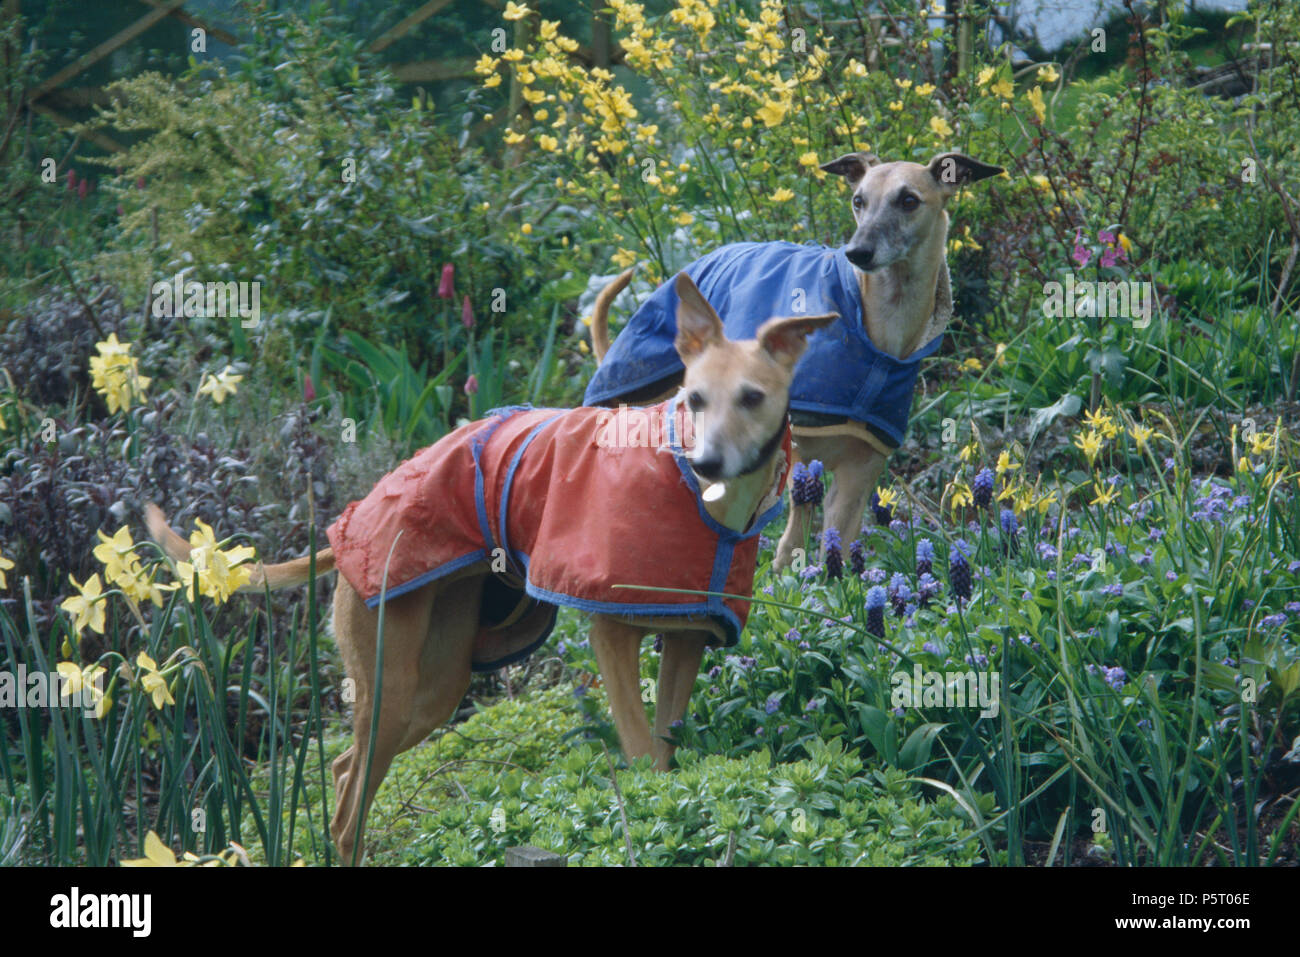 Two whippets wearing blue and red coats standing among daffodils in garden border Stock Photo